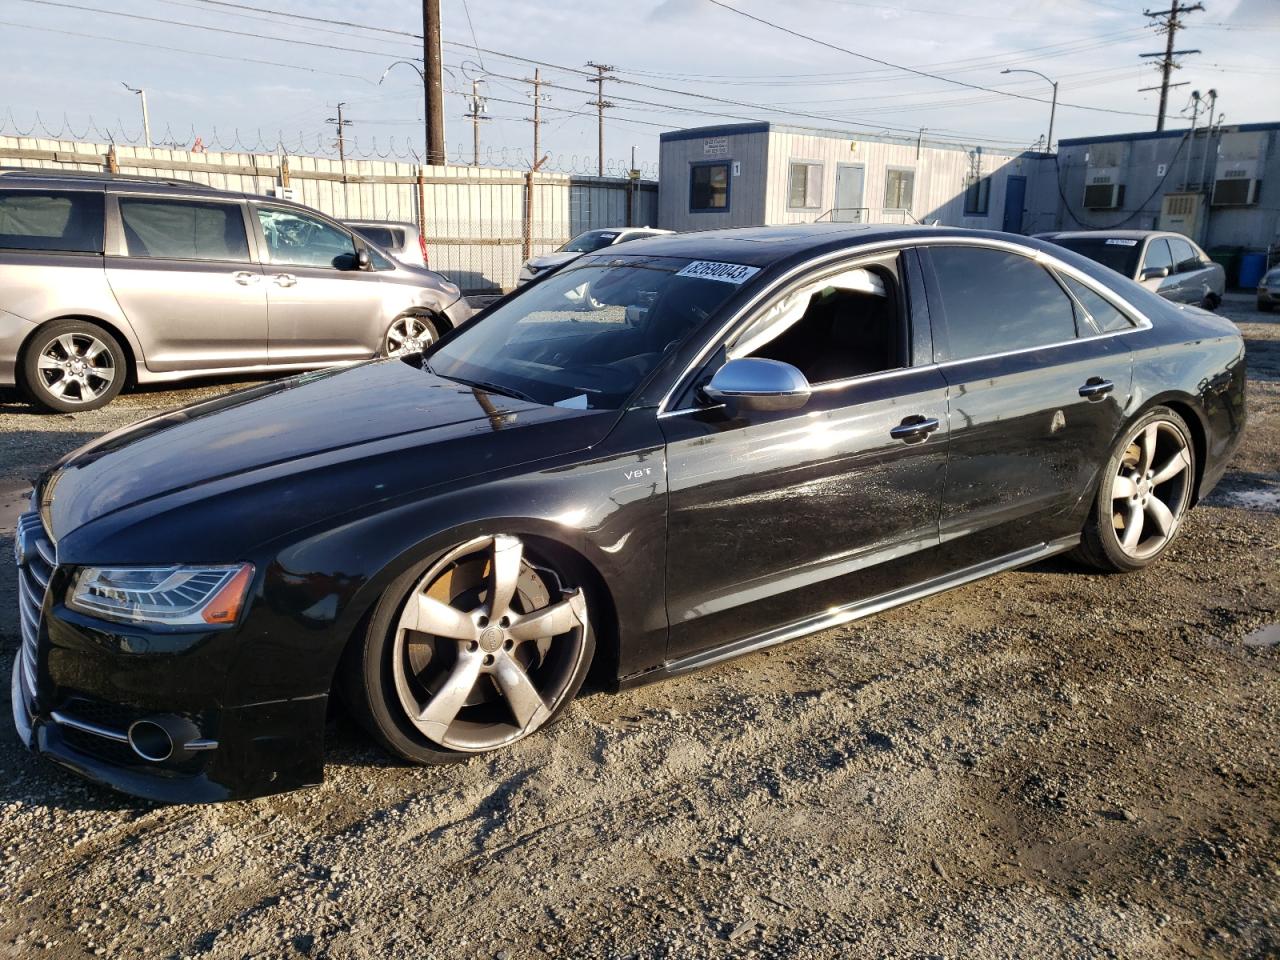 vin: WAUJSAFD7GN003941 WAUJSAFD7GN003941 2016 audi s8 4000 for Sale in 90001 4111, Ca - Los Angeles, Los Angeles, USA